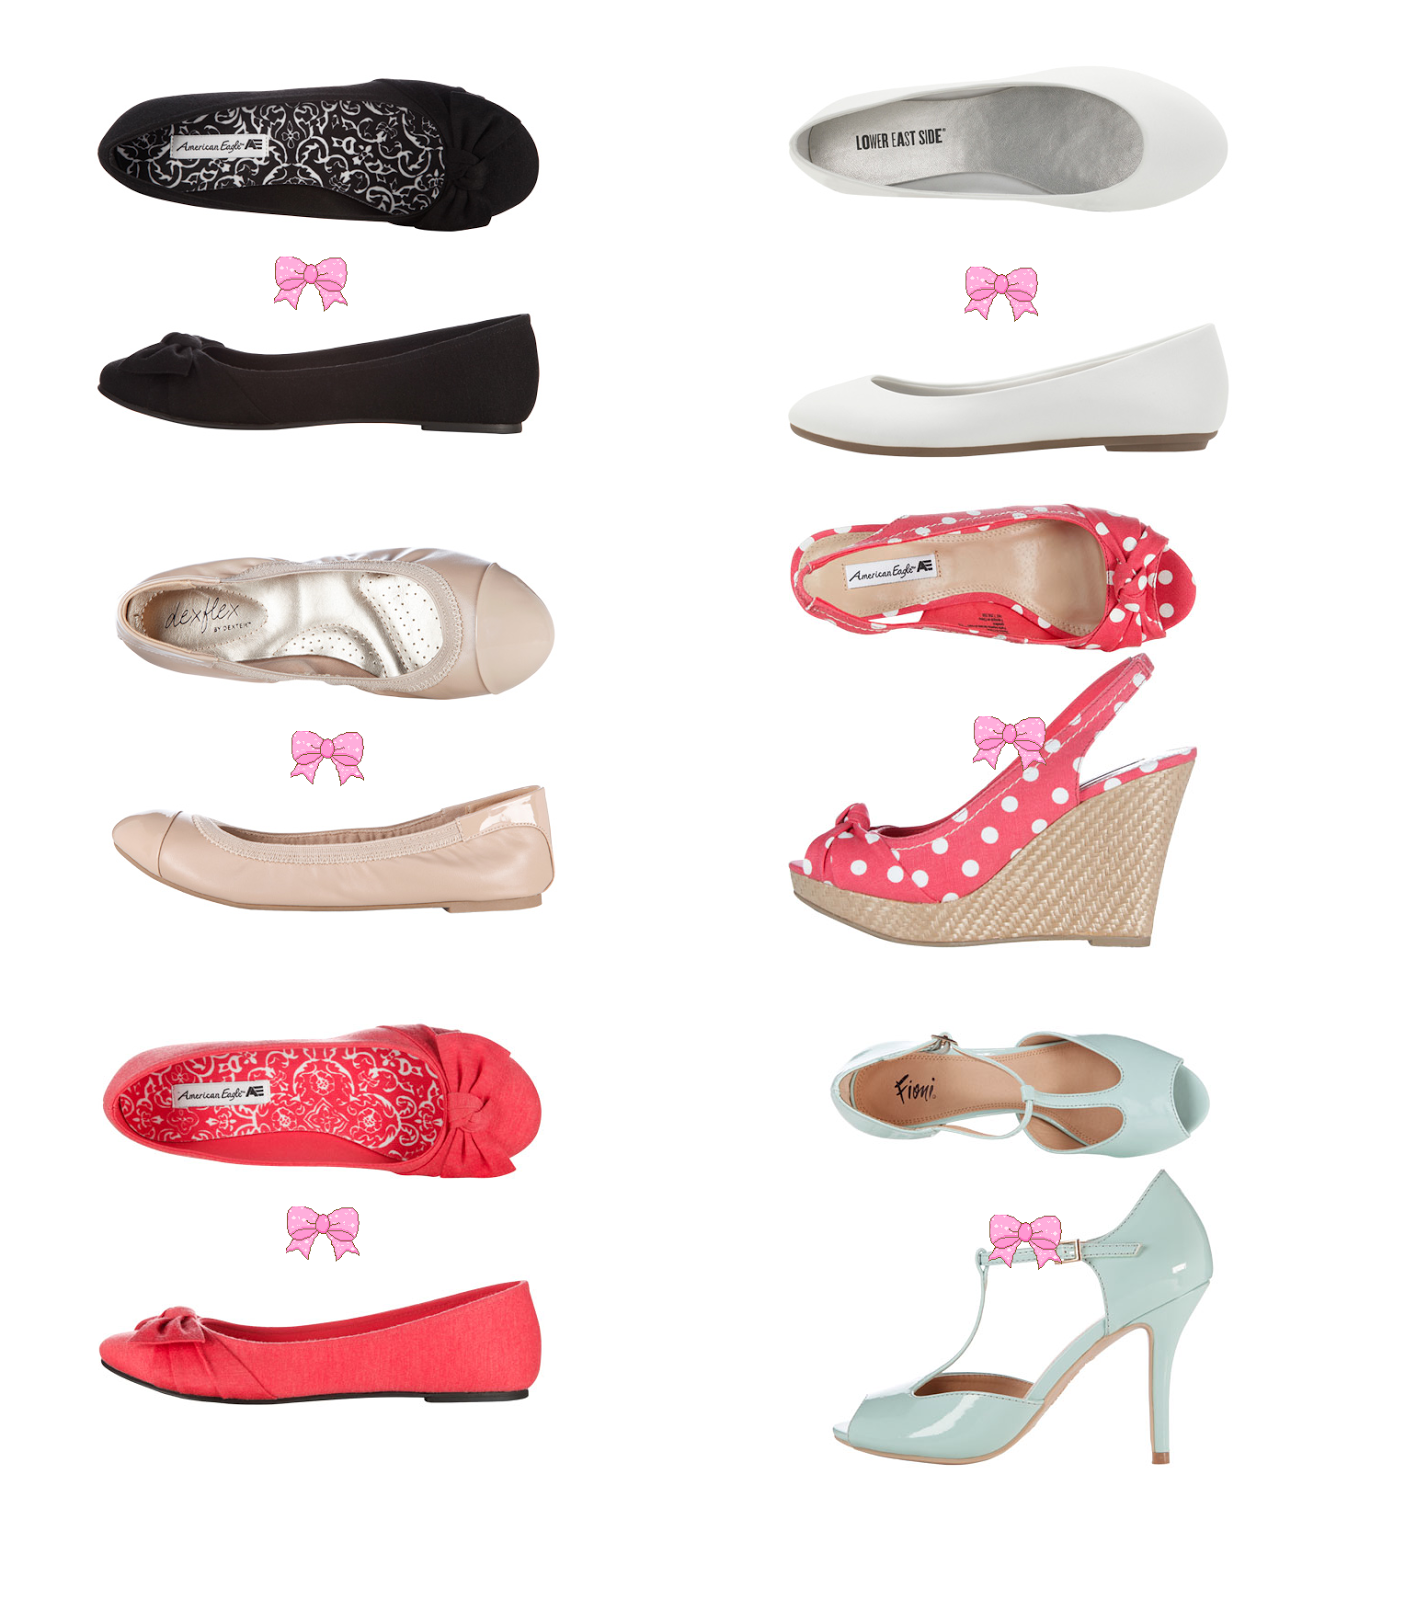 A girls guide to life ♡: Cute shoes for cheap